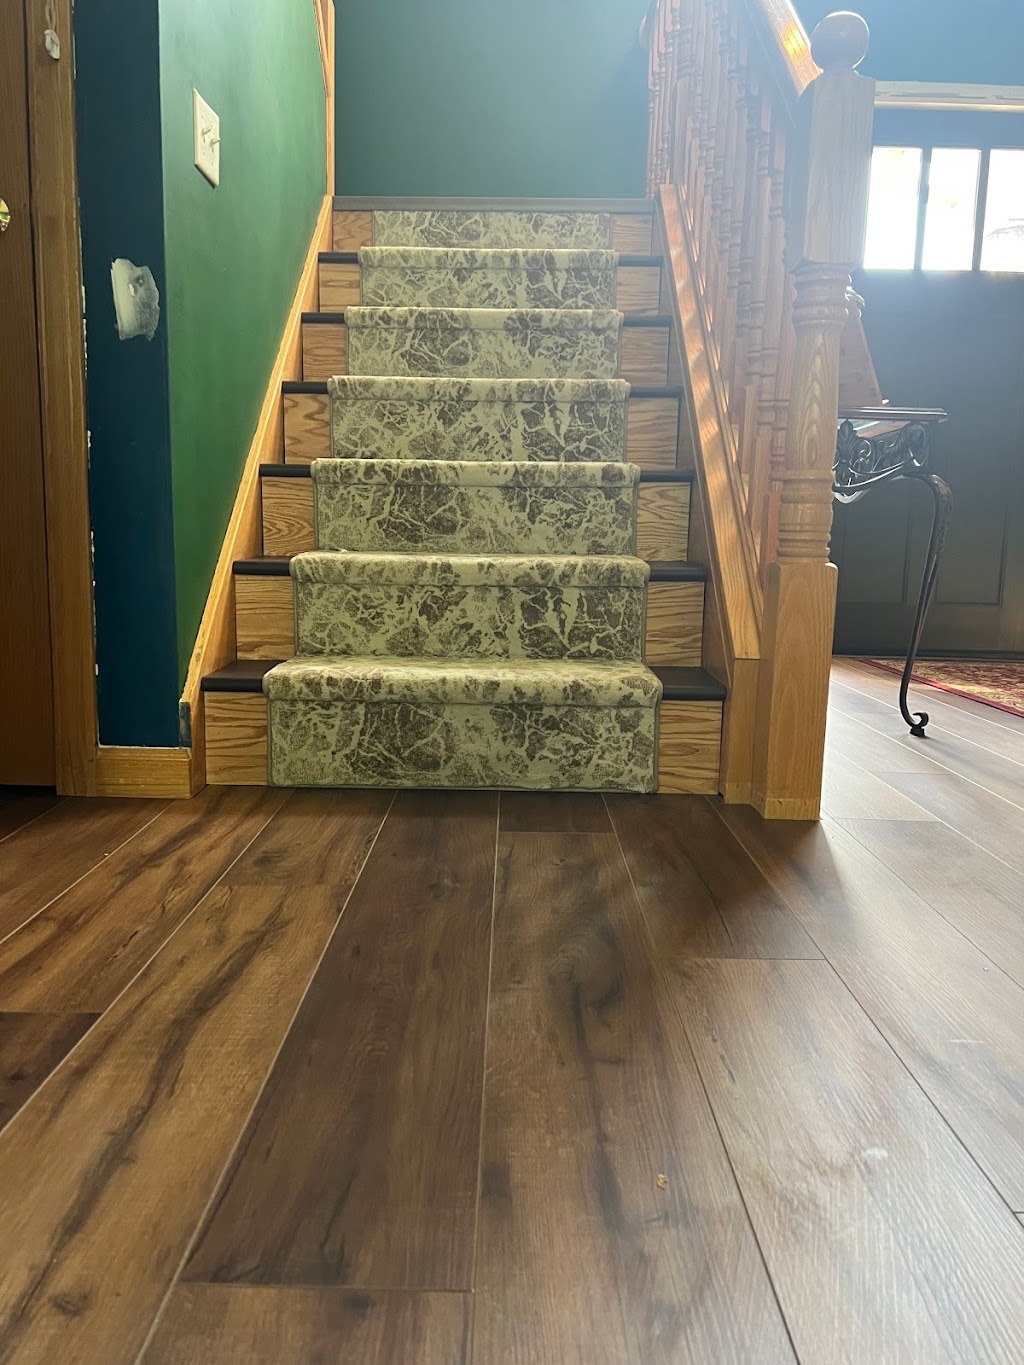 Flooring By Michael | 656 W Market St, Tiffin, OH 44883, USA | Phone: (567) 220-6019